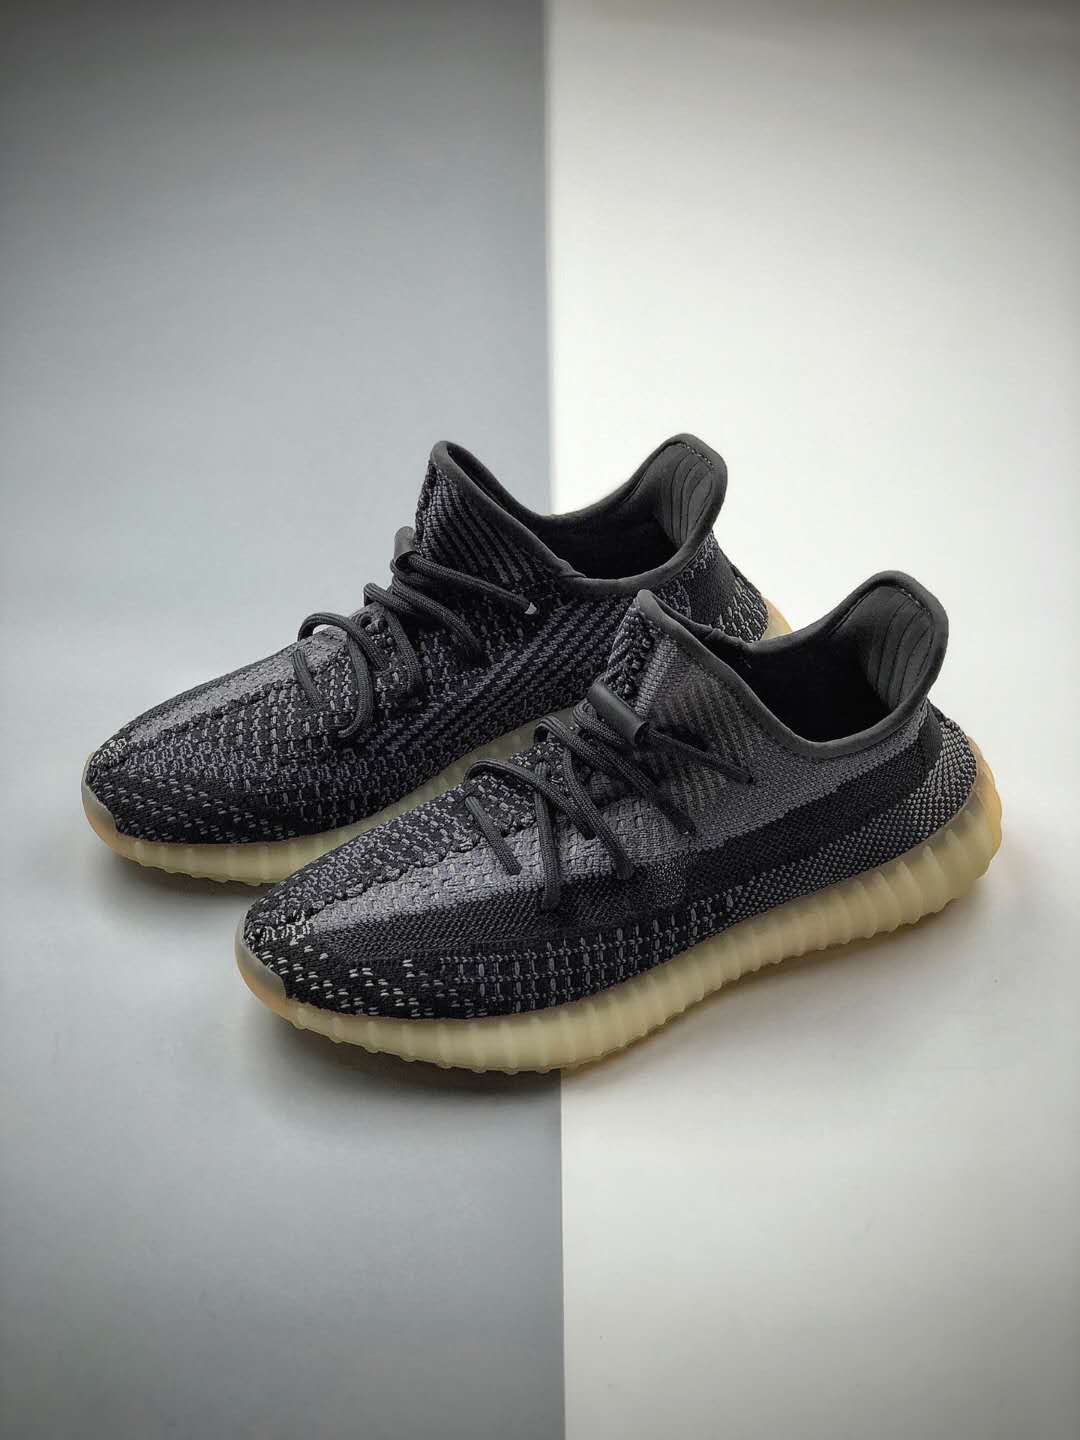 Adidas Yeezy Boost 350 V2 'Carbon' FZ5000 - Shop the Latest Release